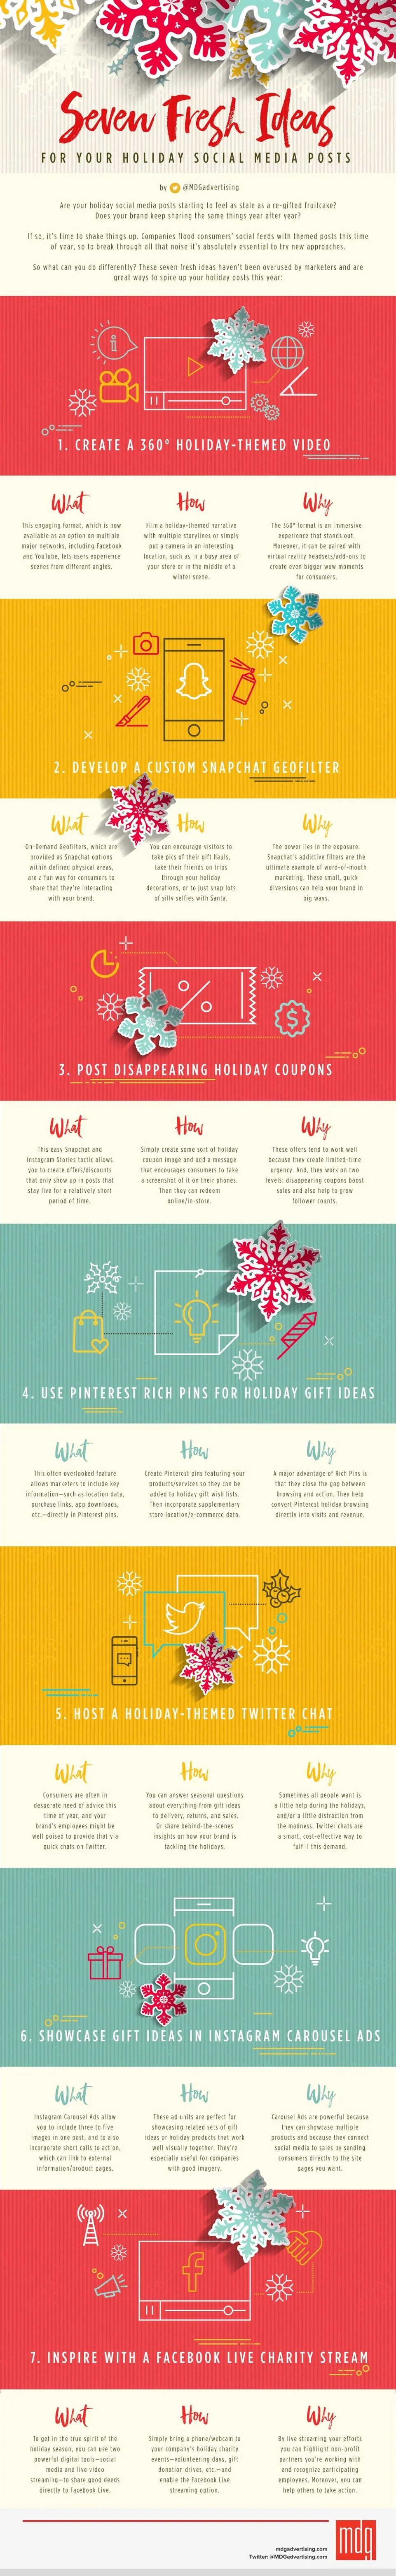 holiday social media posts - infographic